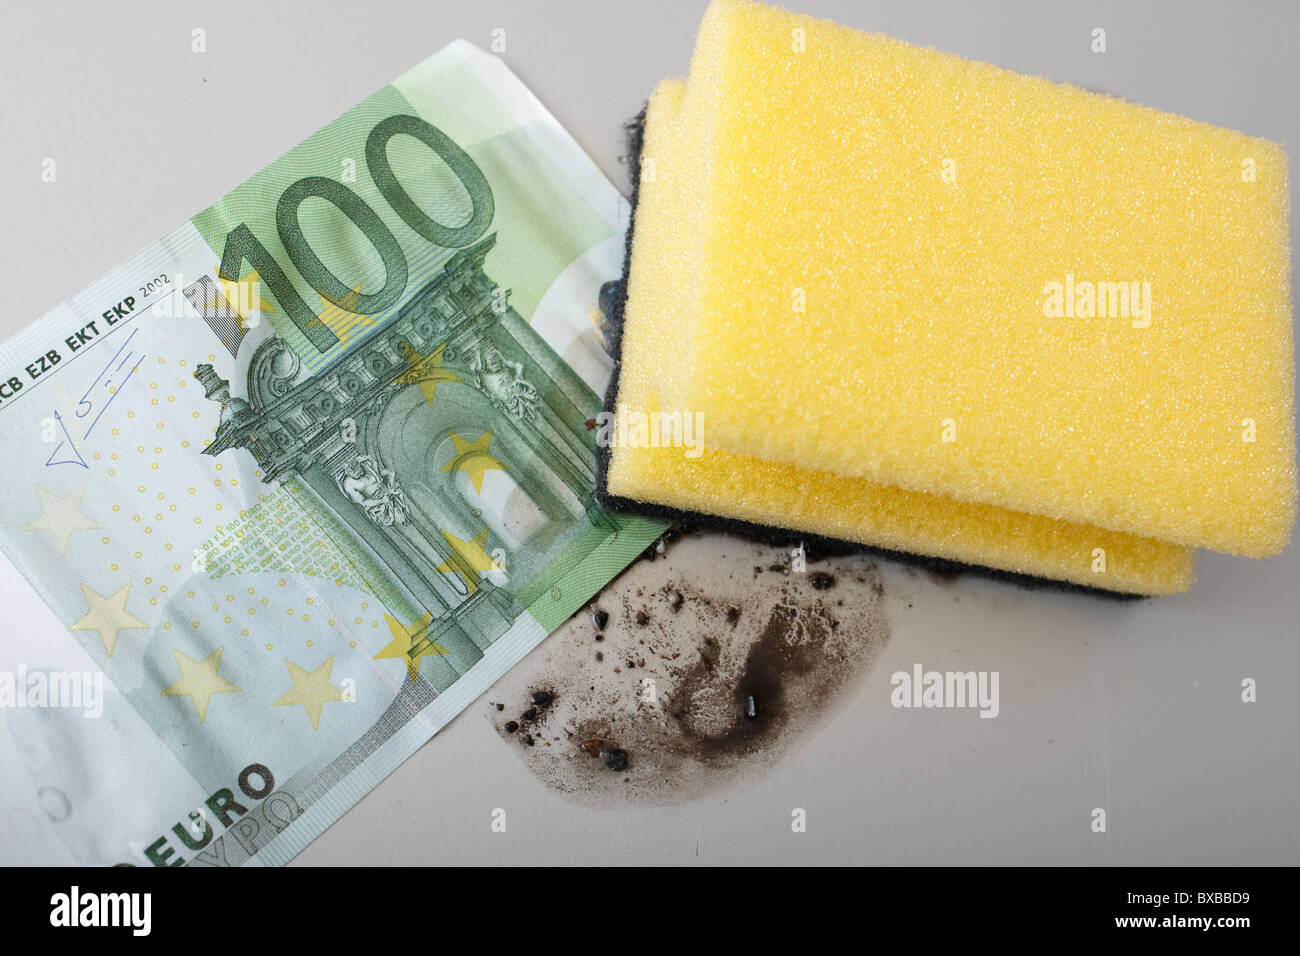 Banknote being cleaned with a sponge, symbolic image for dirty money Stock Photo